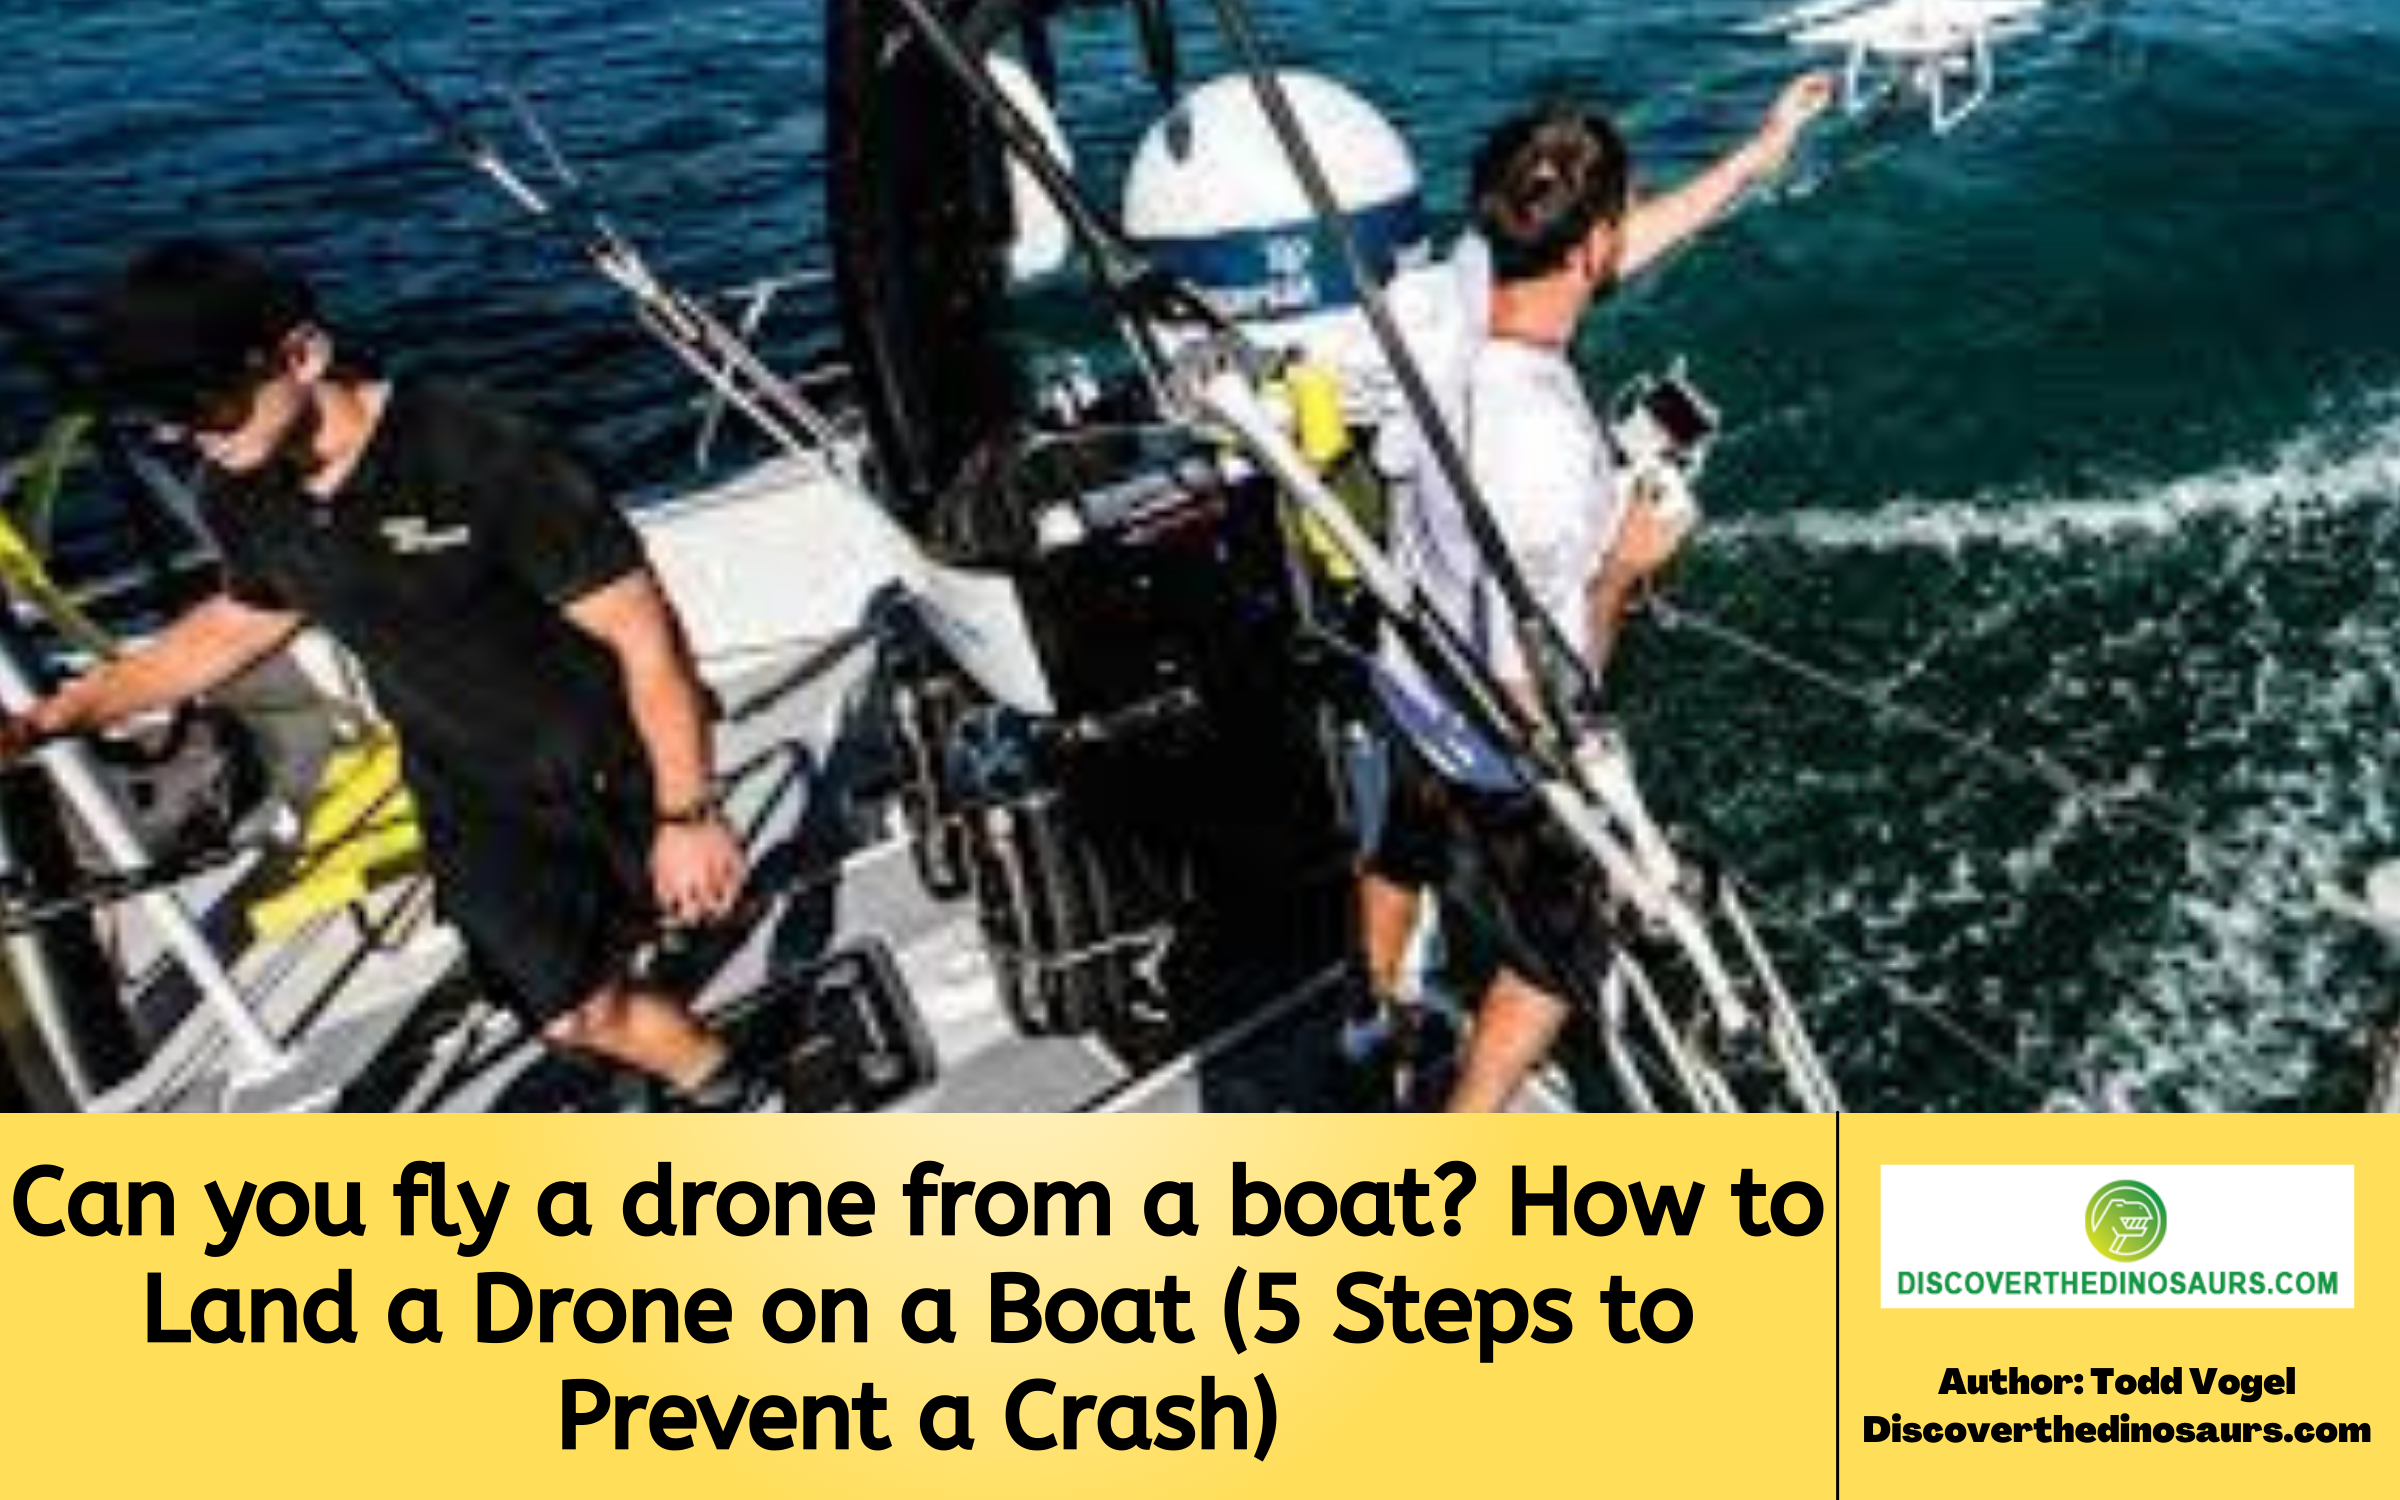 Can you fly a drone from a boat?